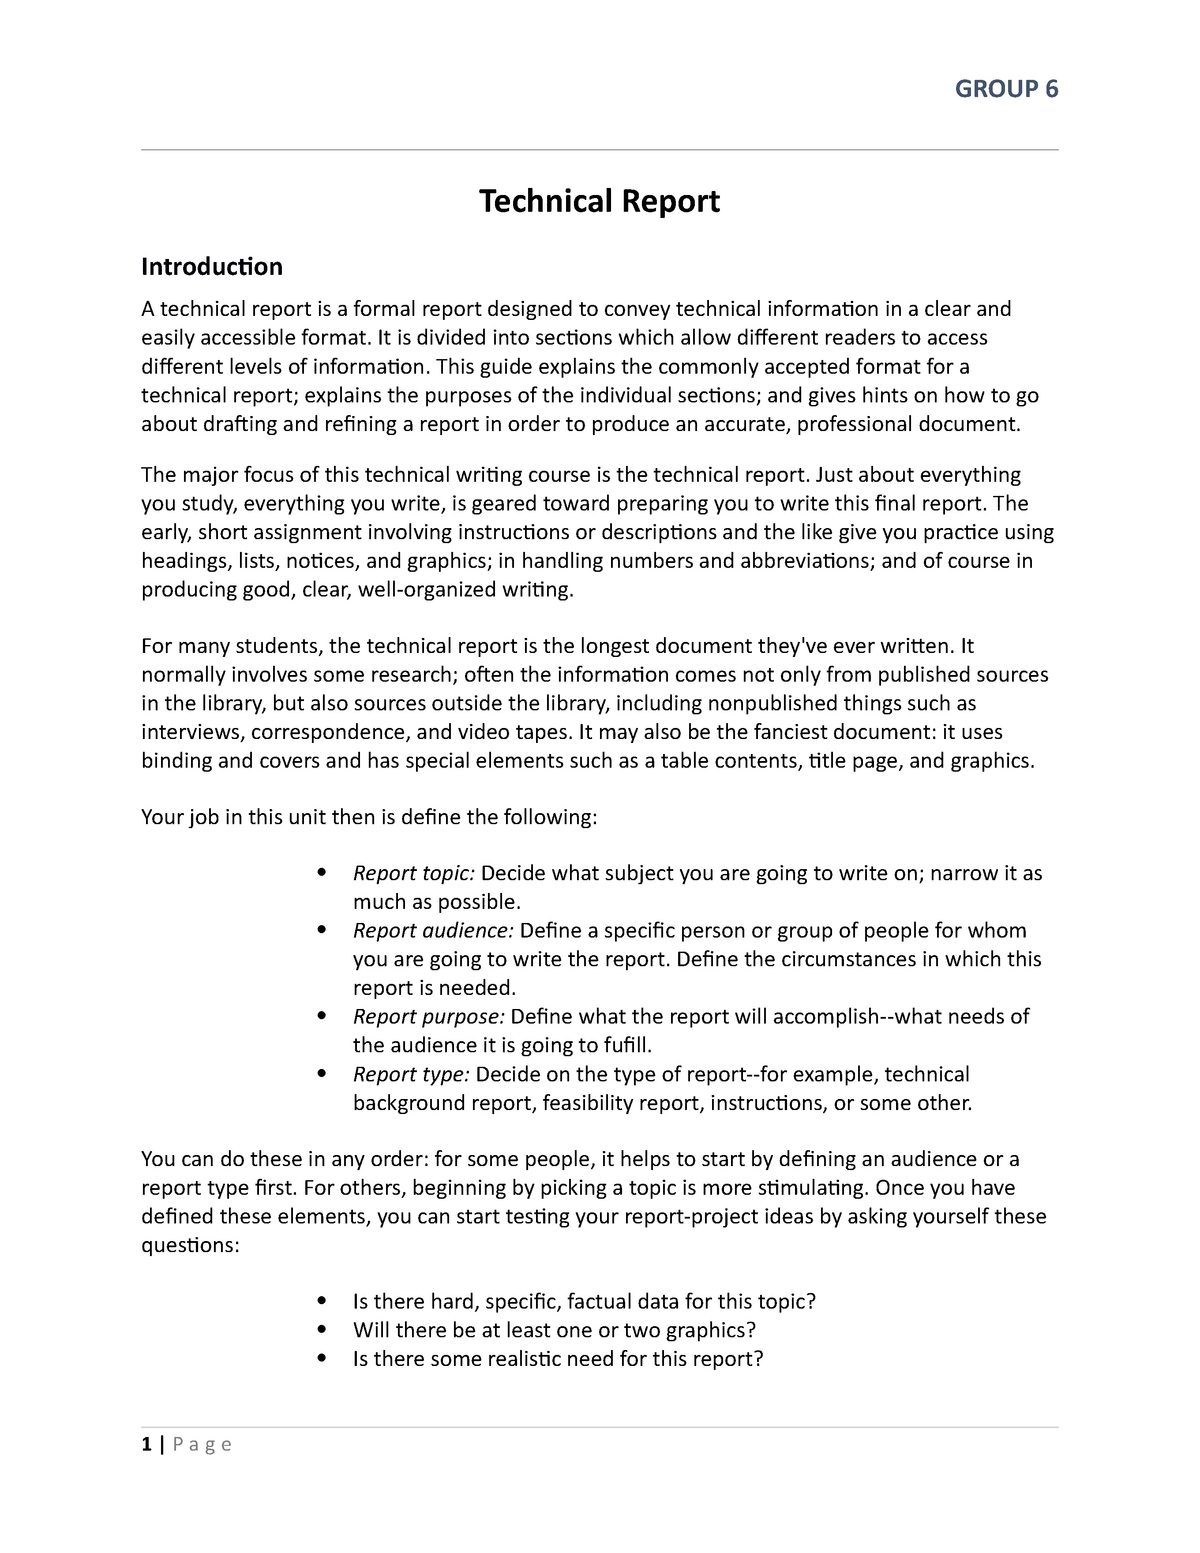 research report and technical report